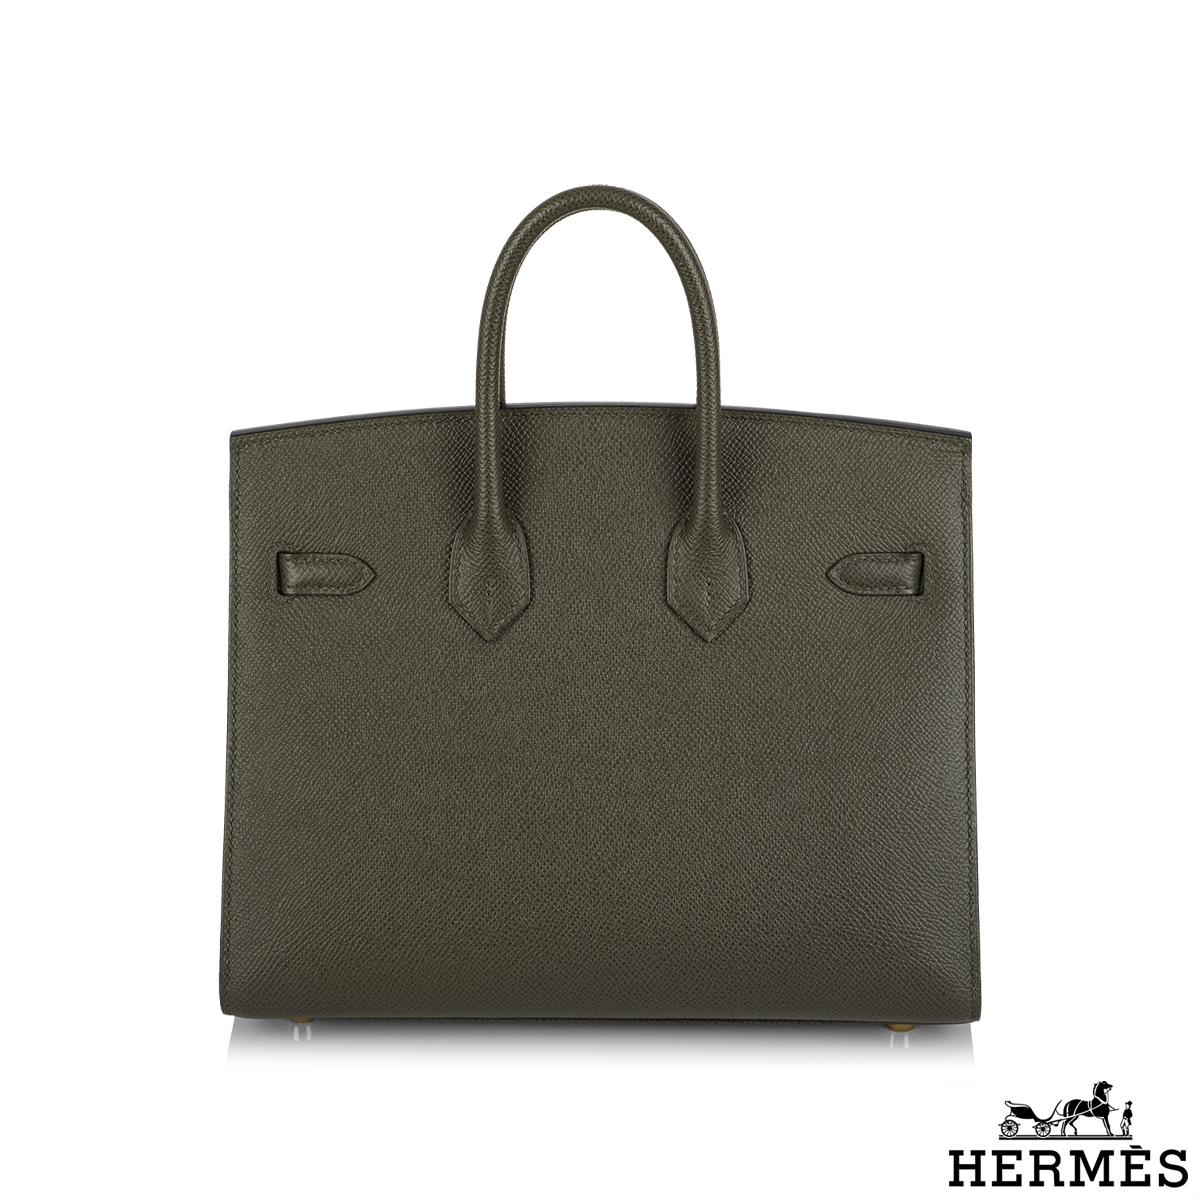 A gorgeous Hermès Birkin Sellier 25cm Vert de Gris bag. The exterior of this birkin is in vert de gris Epsom leather with tonal stitching. It features gold tone hardware with two straps and front toggle closure. The interior is lined with vert de